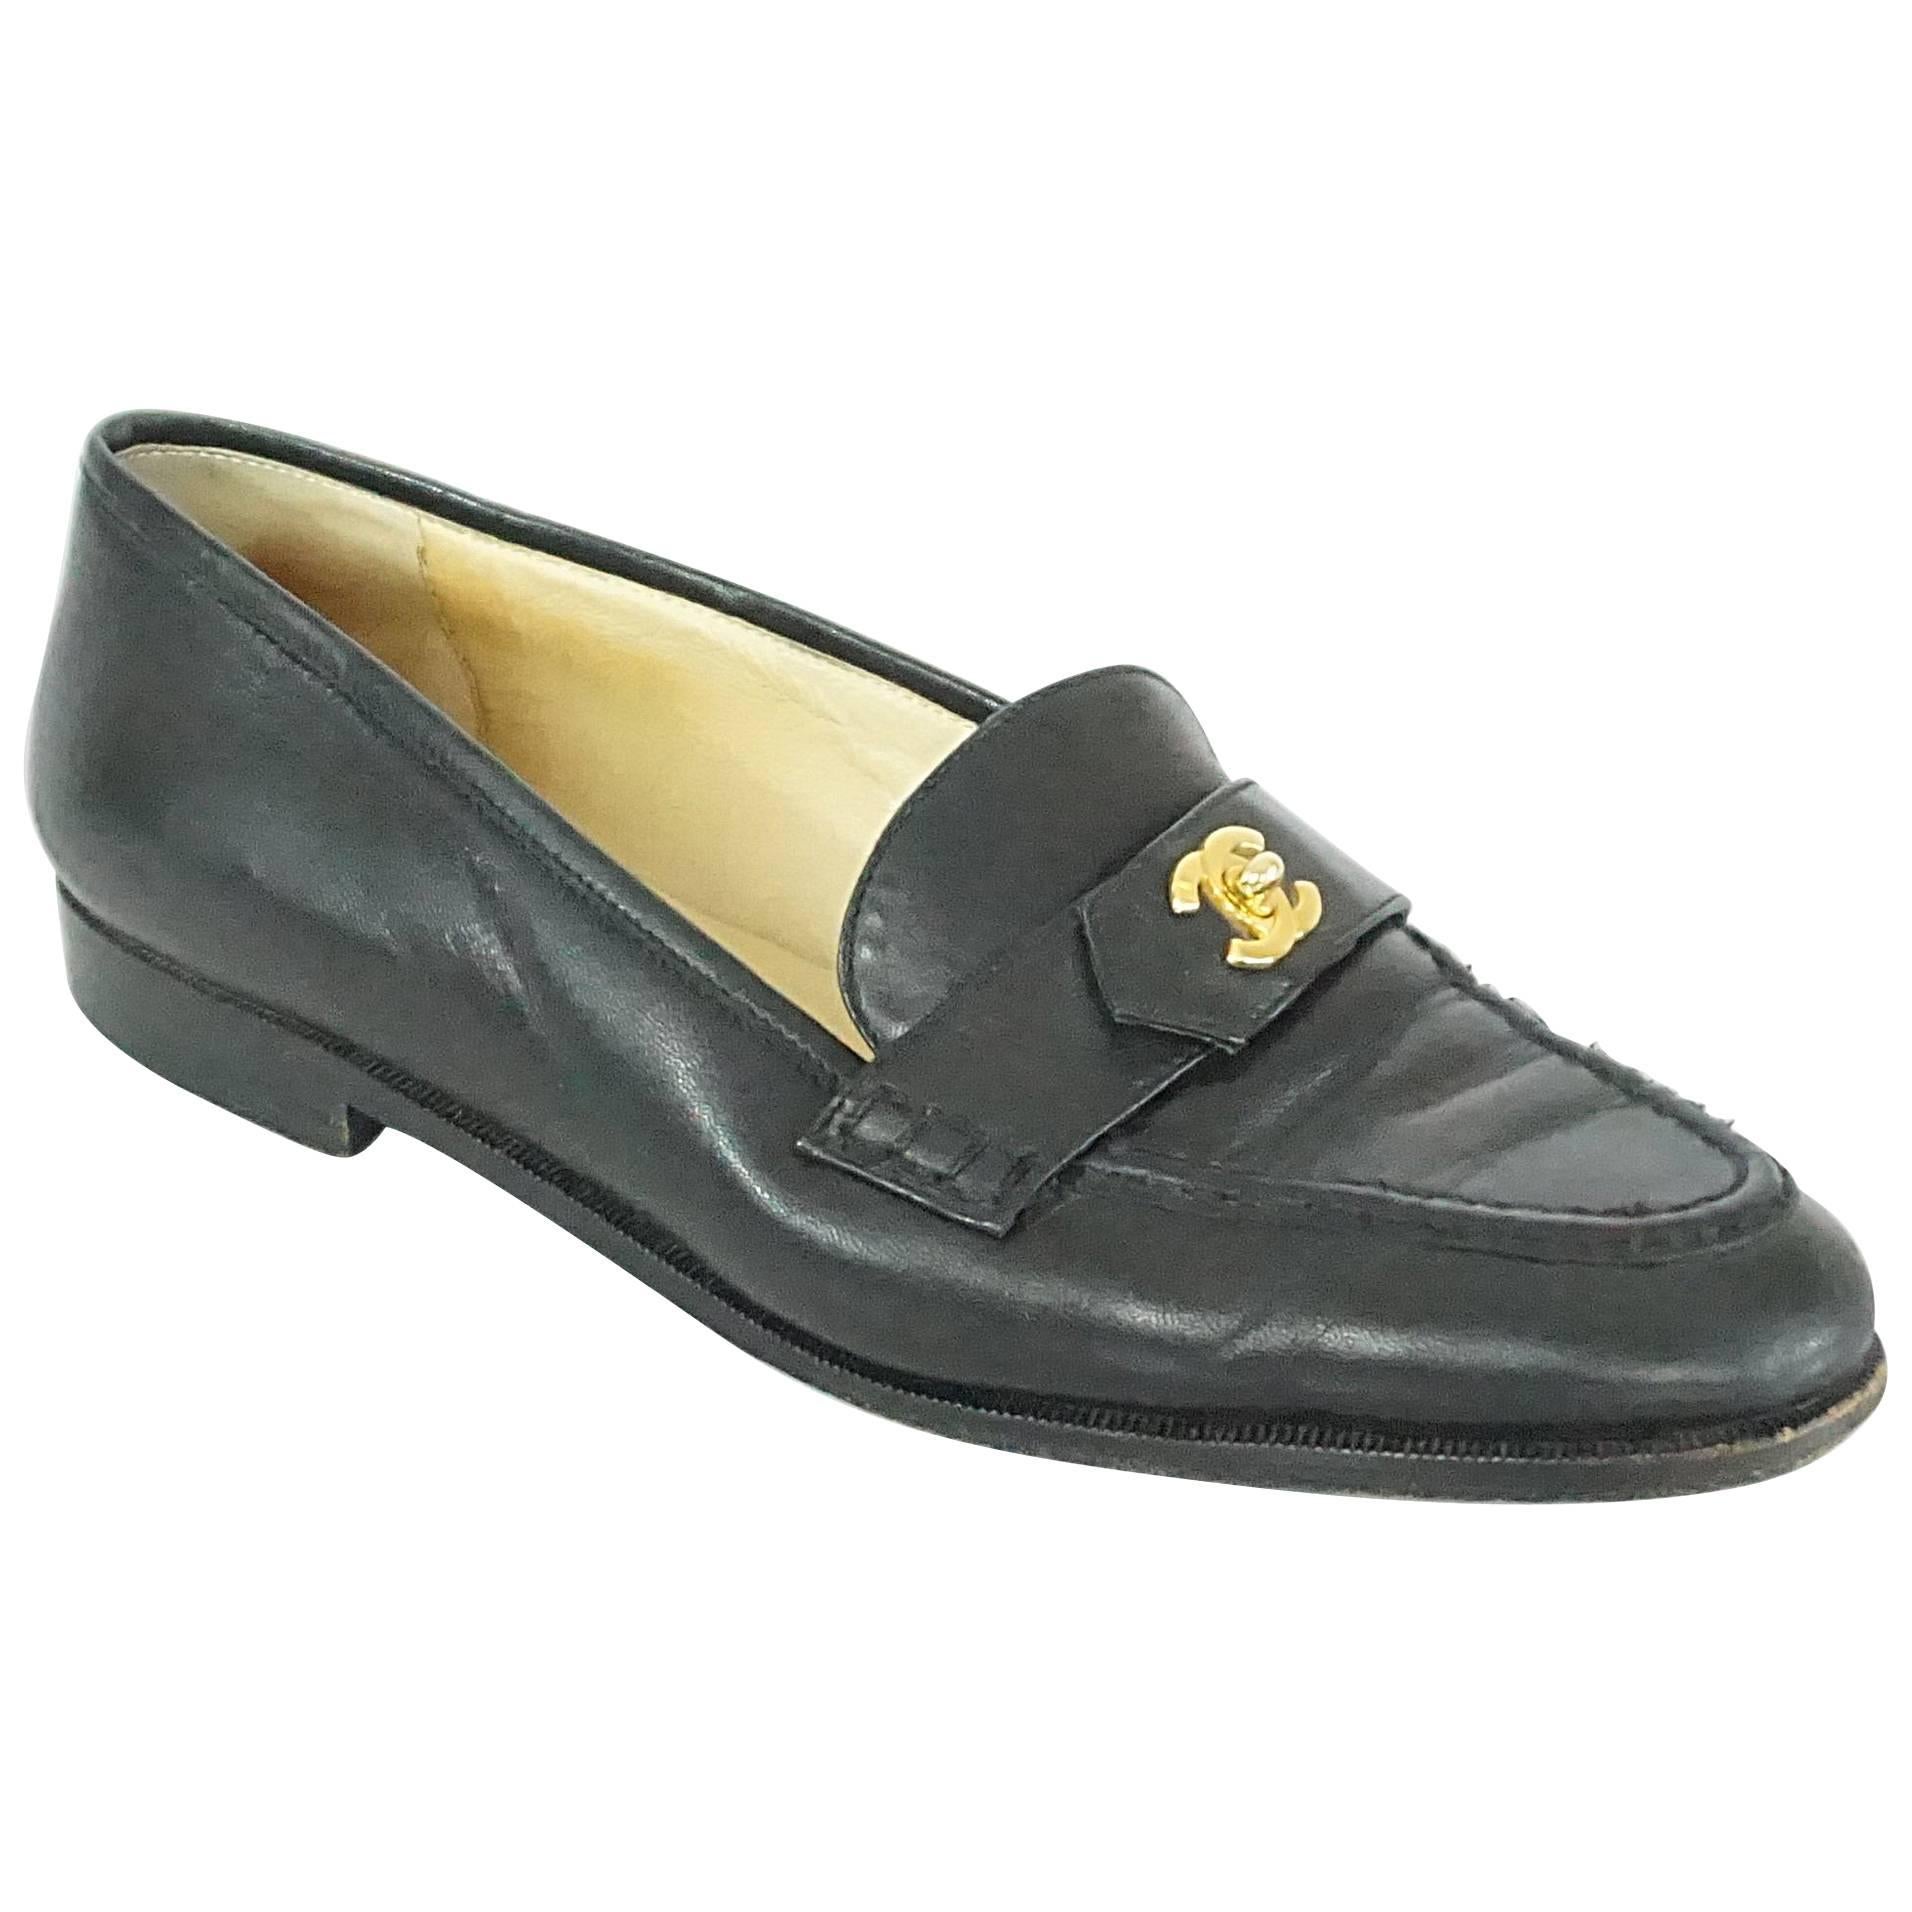 Chanel Black Leather Loafers with "CC" Turnkey Detail - 40